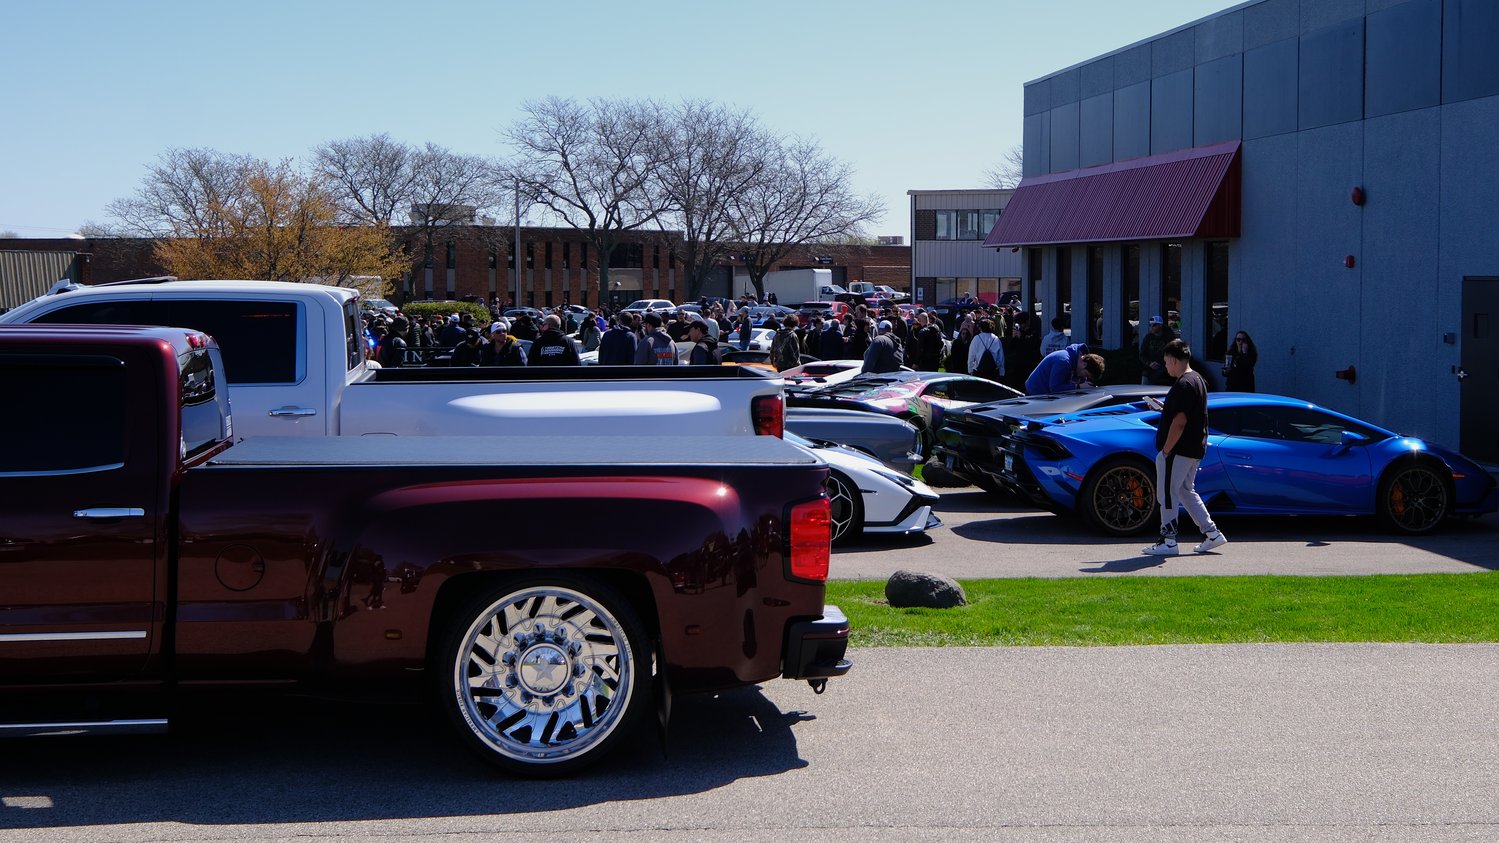 Big turn out at the Illinois Motors Cars and Coffee car show.